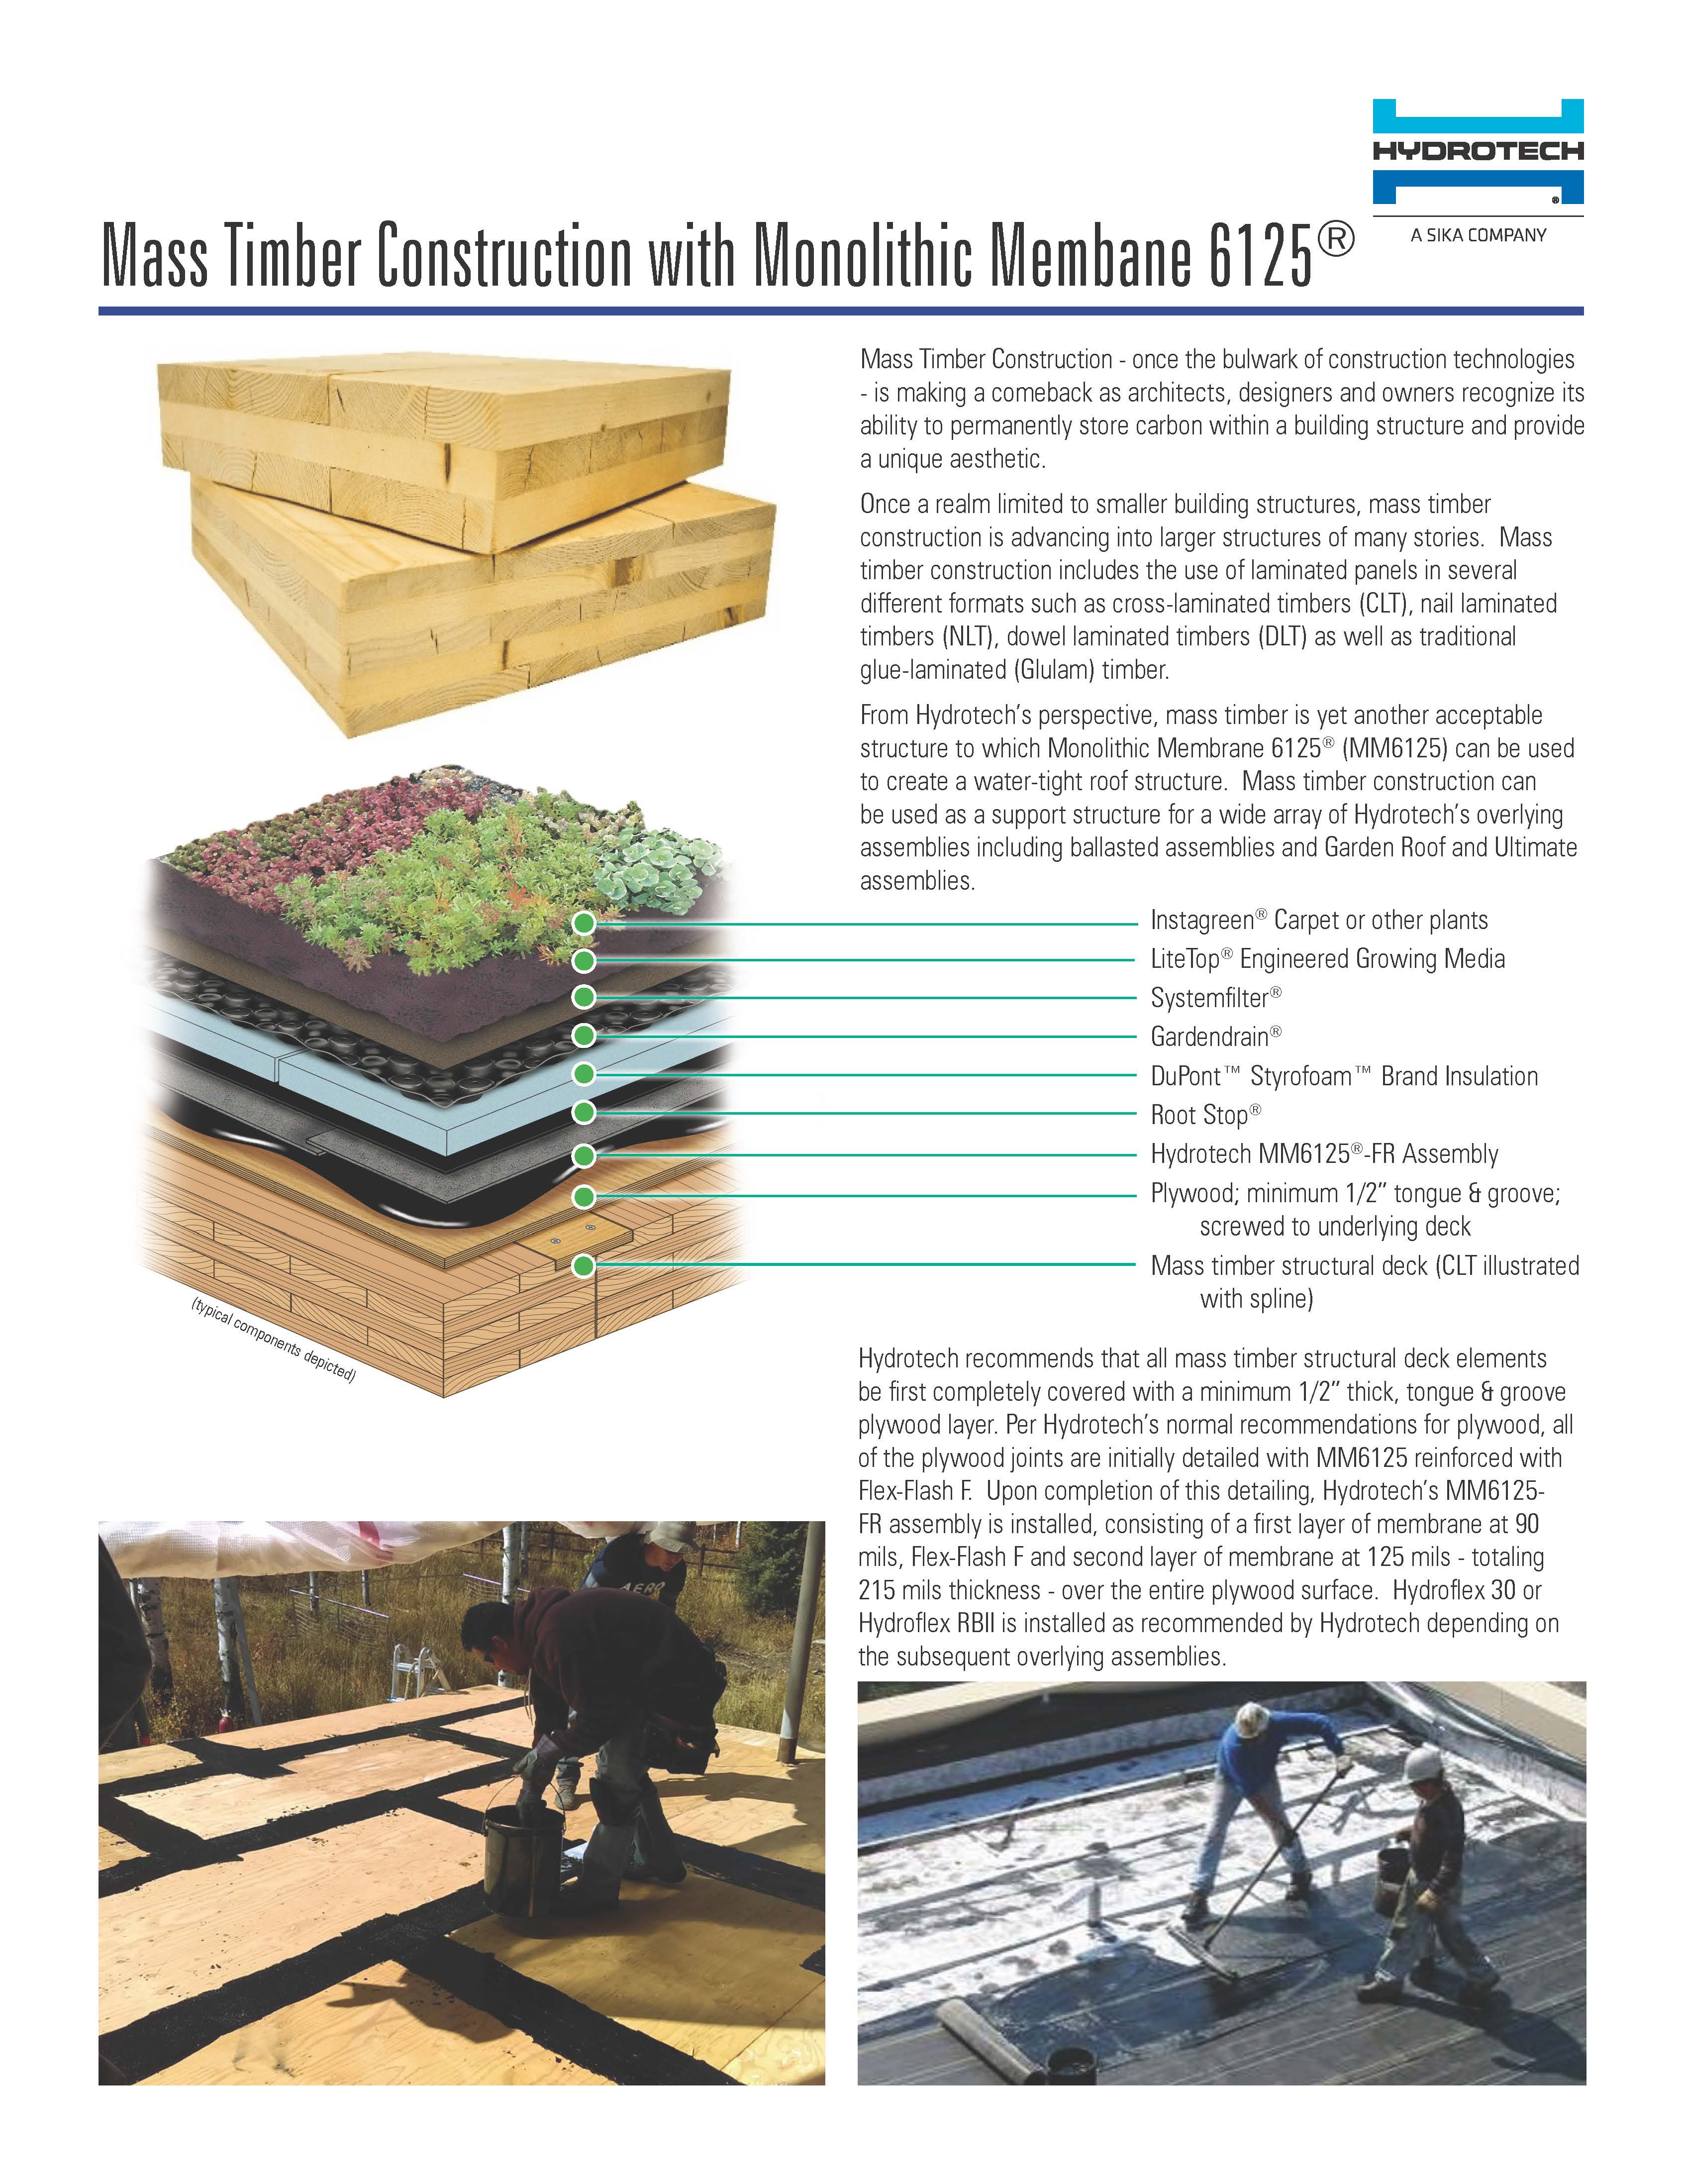 Mass Timber Construction with MM6125